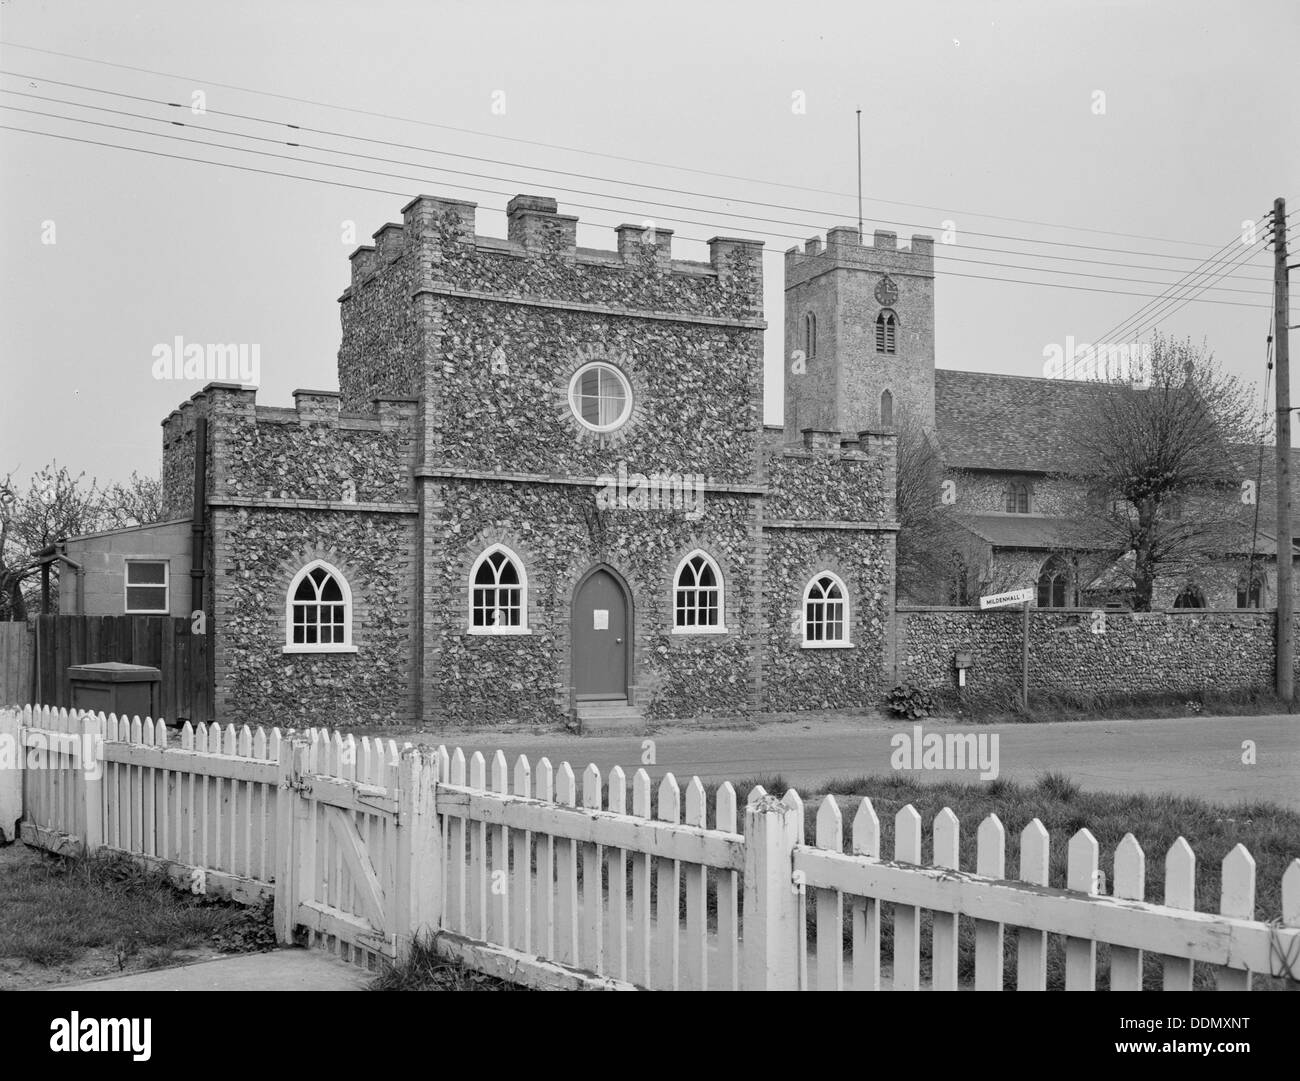 Church Cottage, 1 The Street, Barton Mills, Suffolk, May 1970. Artist: EH/RCHME staff photographer Stock Photo